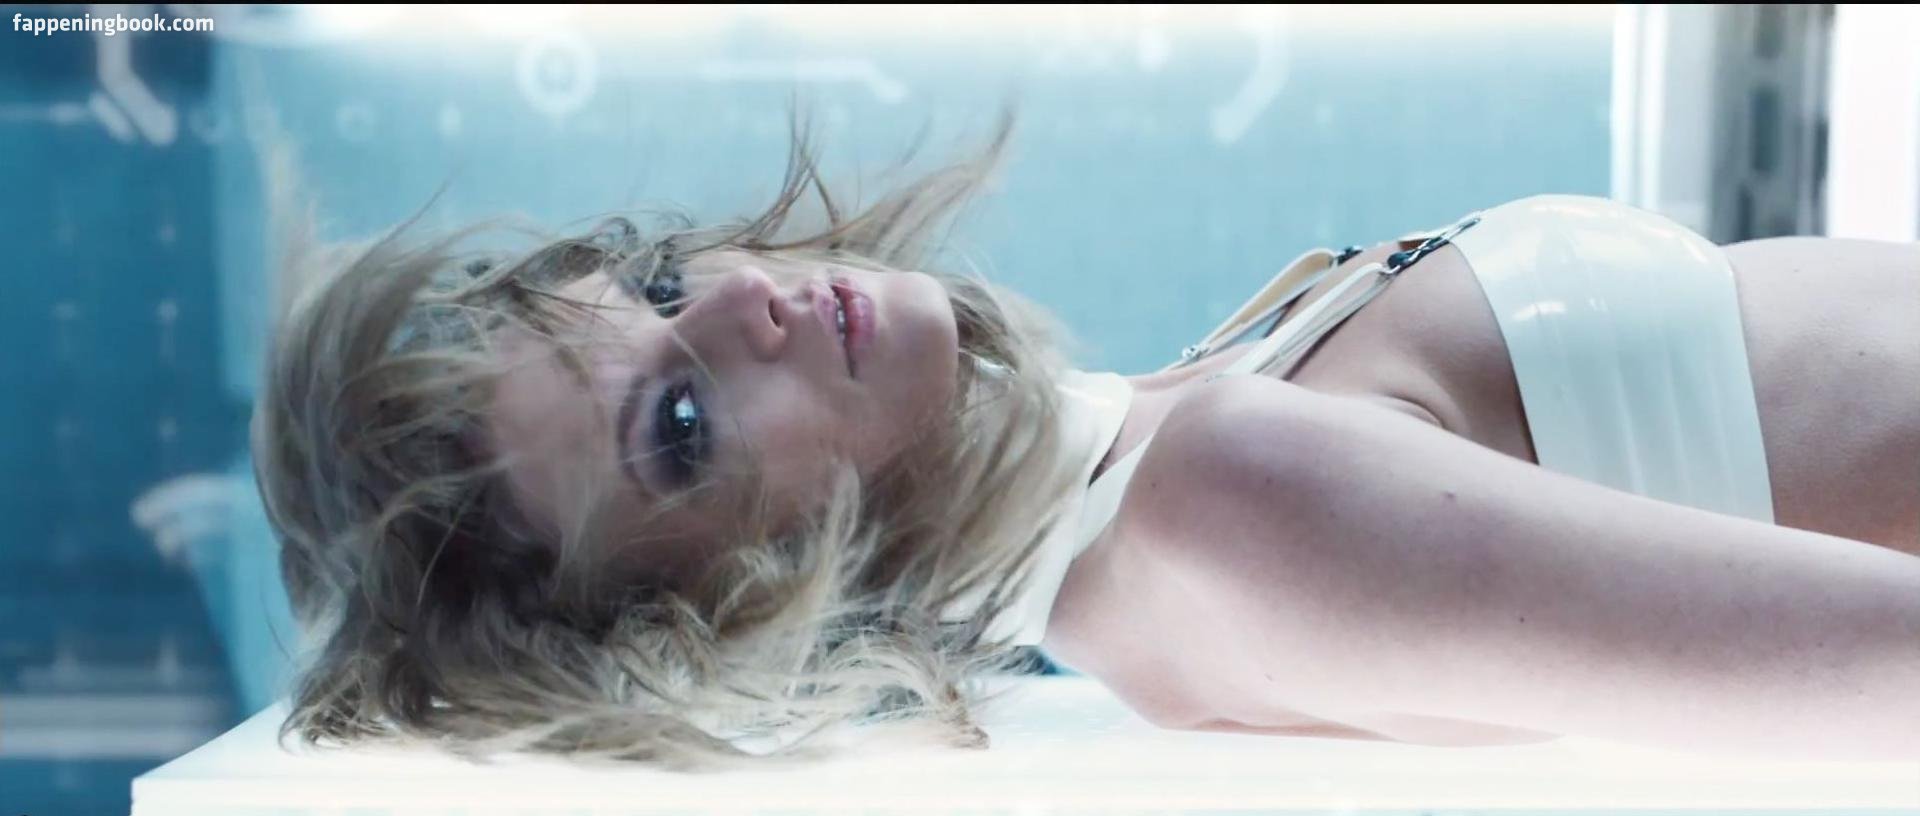 Taylor Swift Nude, The Fappening - Photo #522092 - FappeningBook.